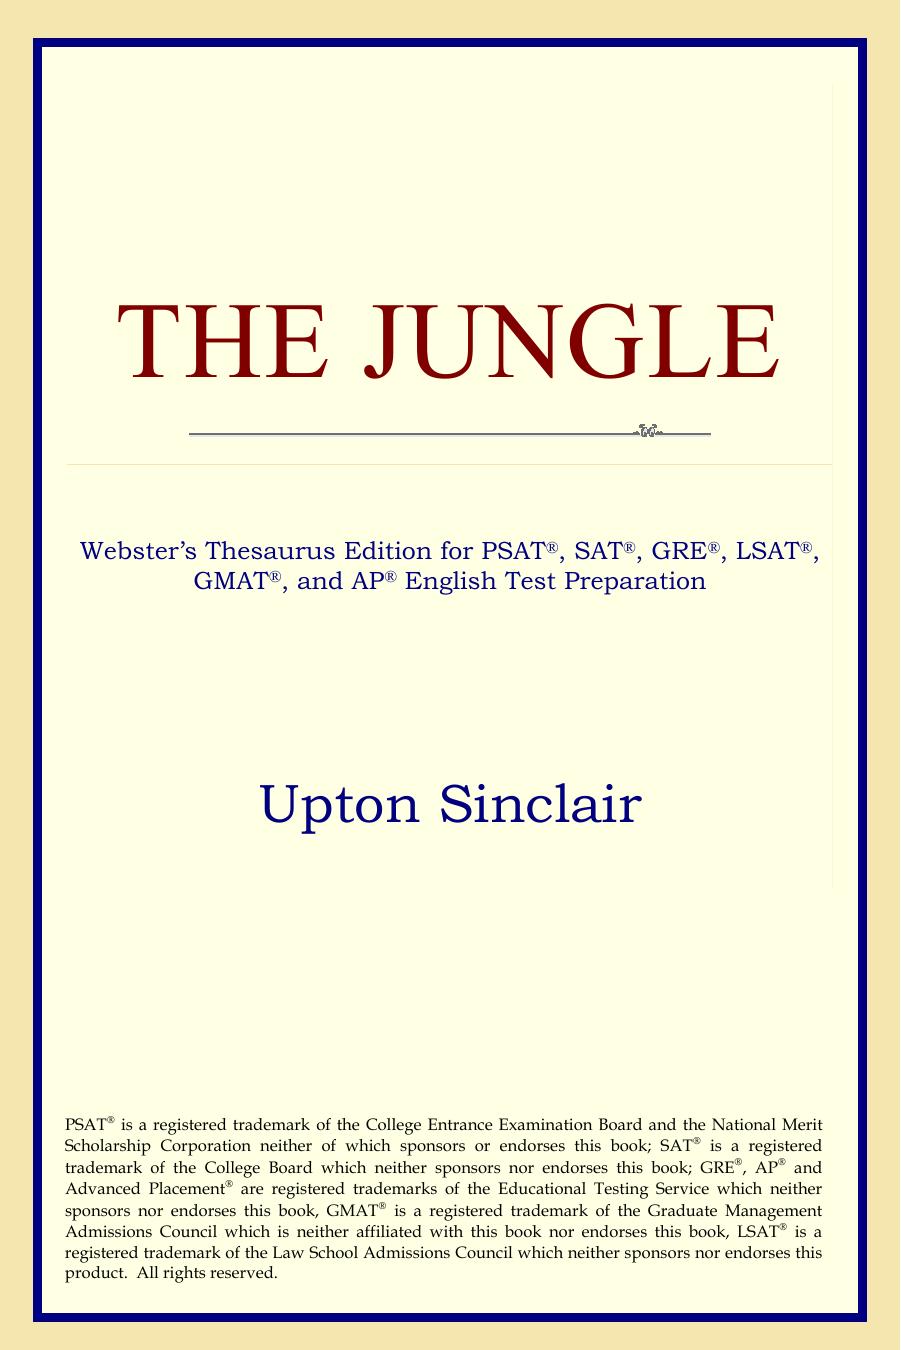 The Jungle (Websters Thesaurus Edition) (Upton Sinclair)